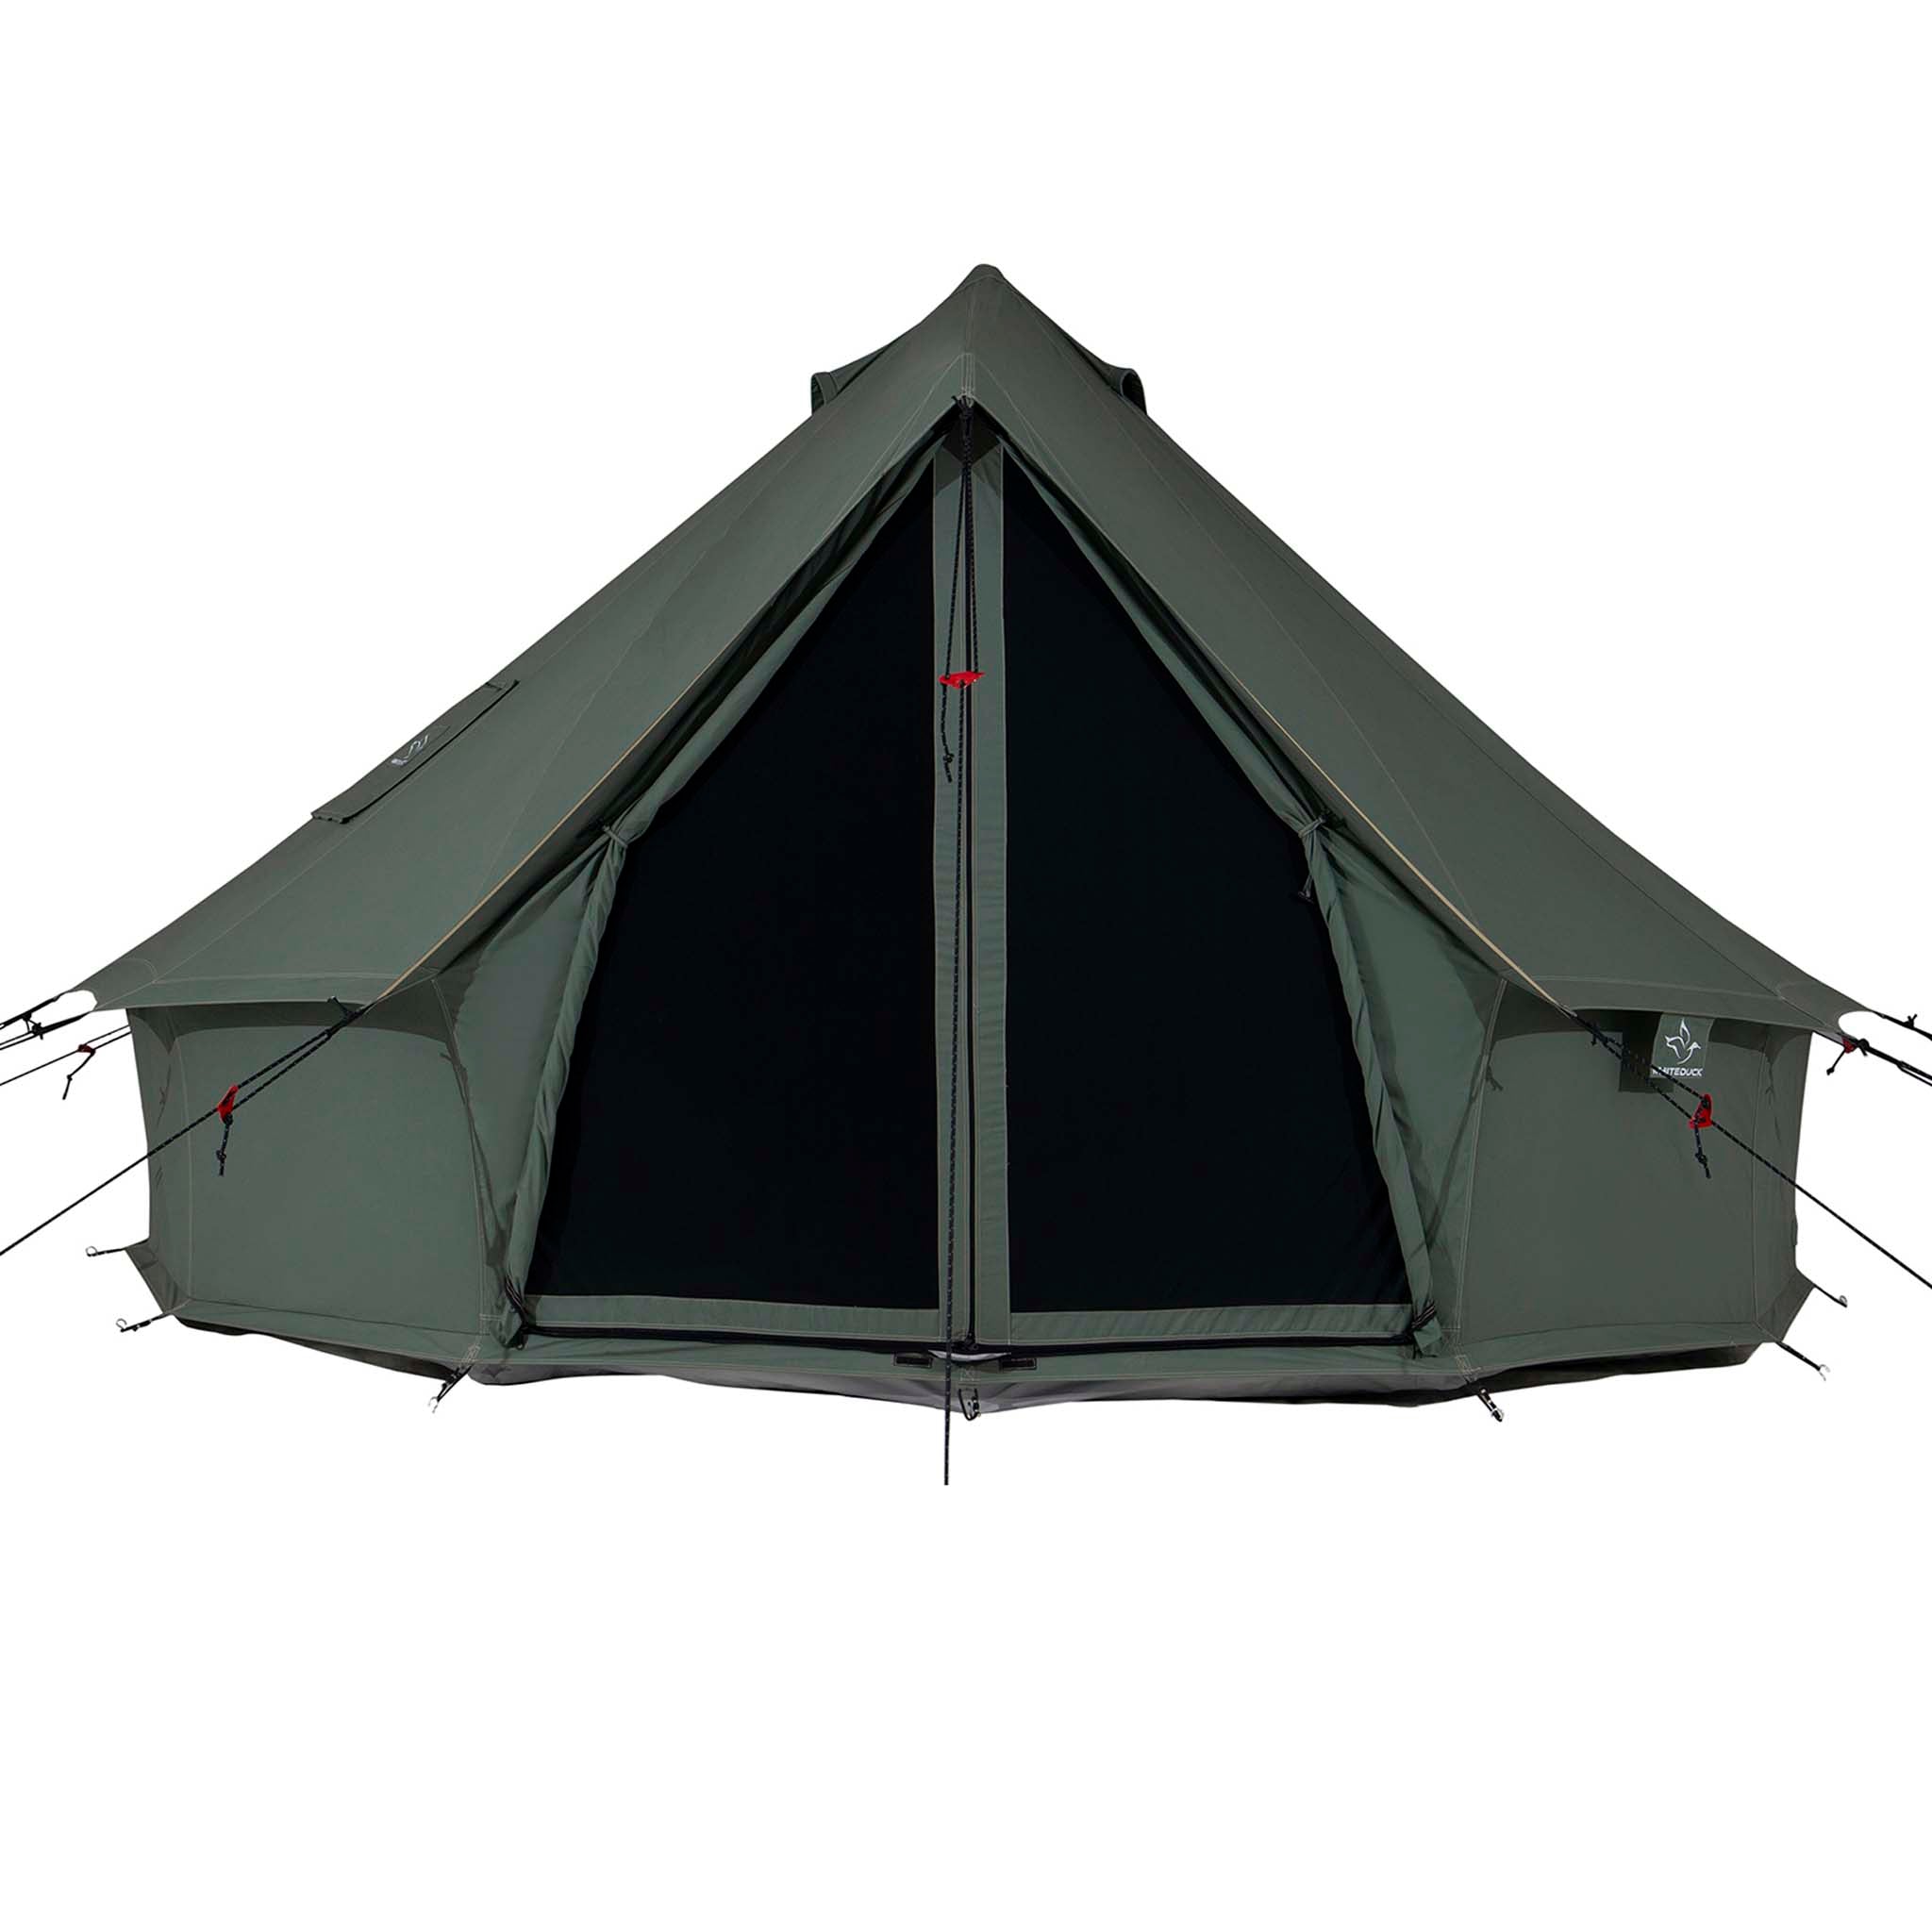 Used - 16' Regatta Bell Tent - Forest Green